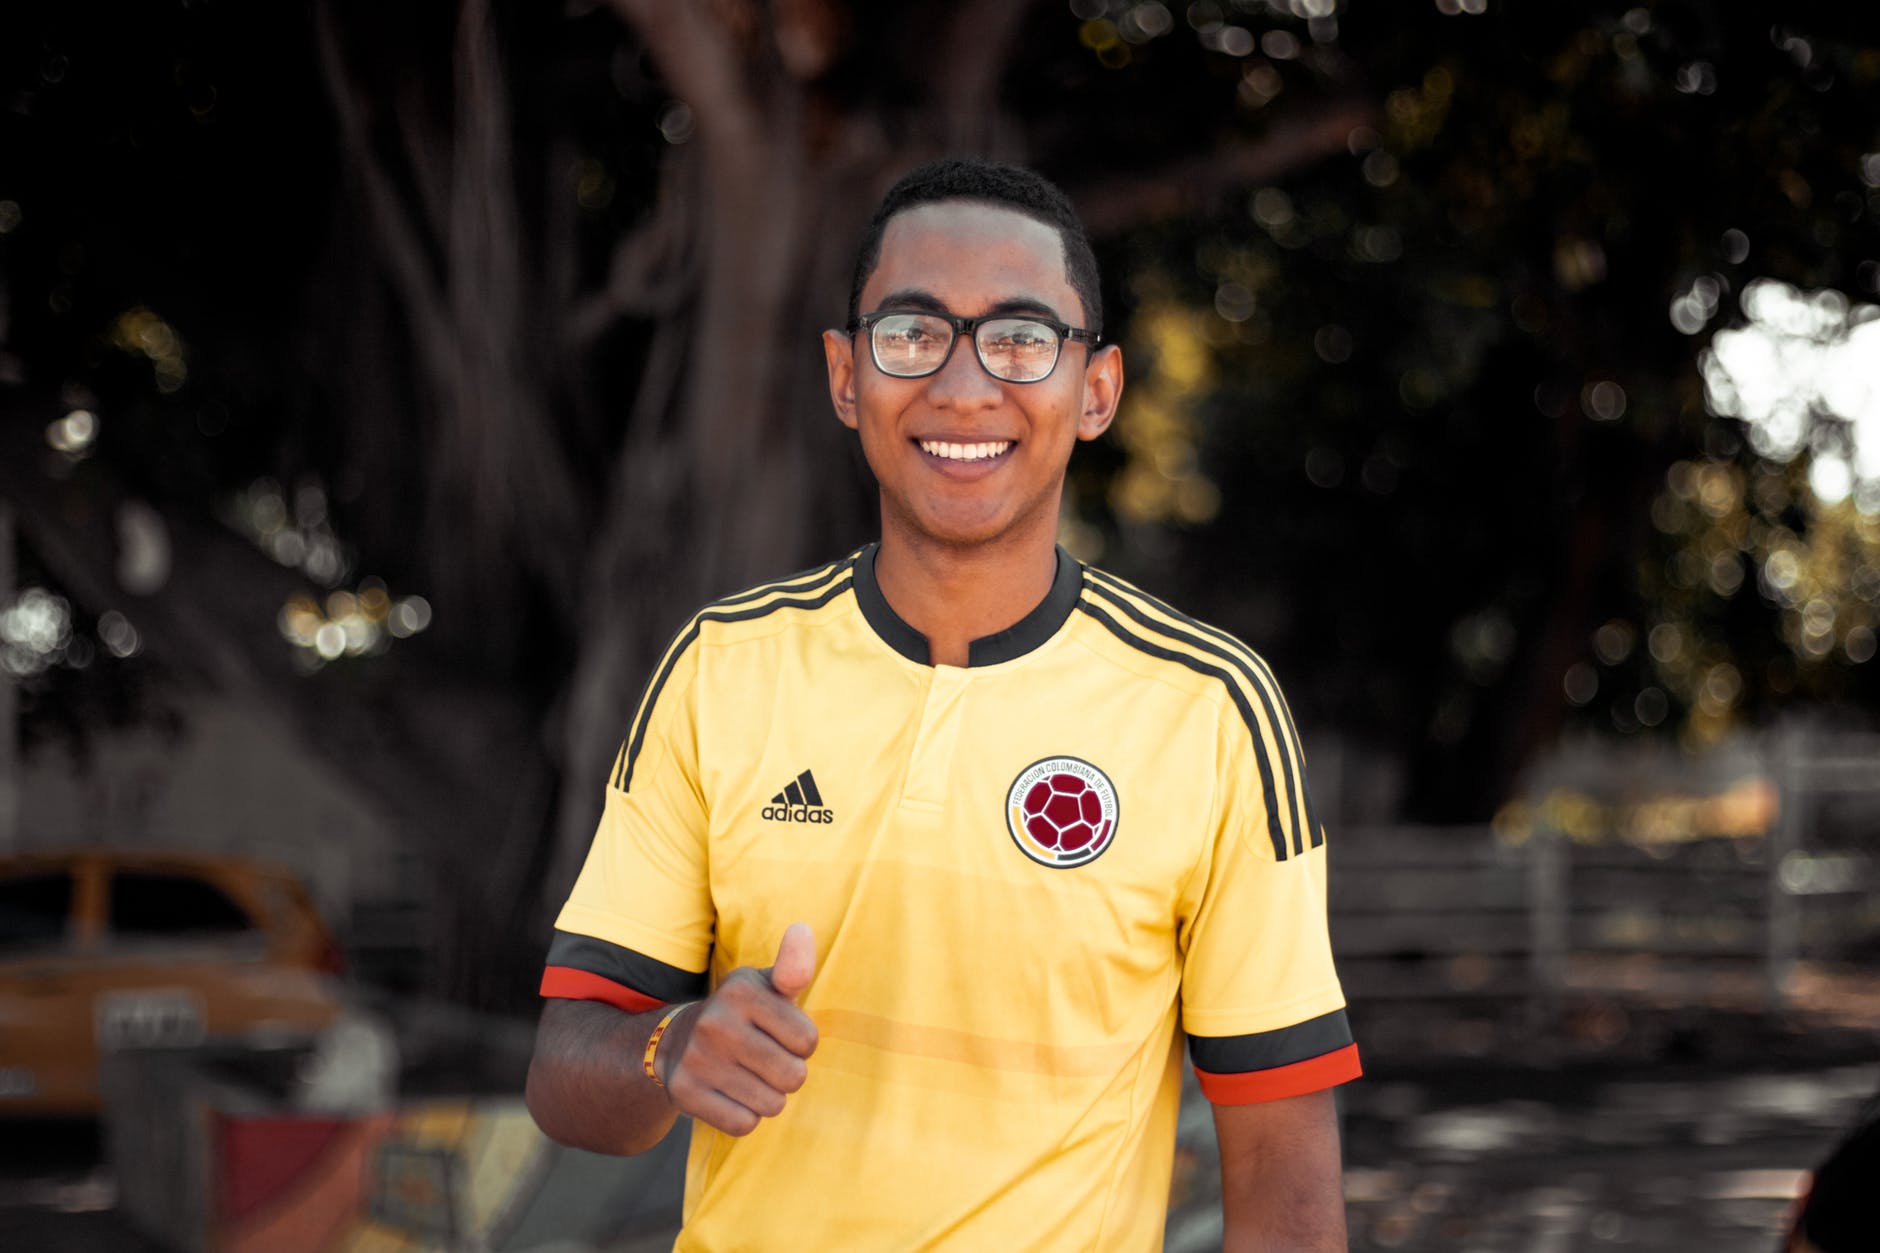 Smiling man in soccer shirt giving a thumbs up sign